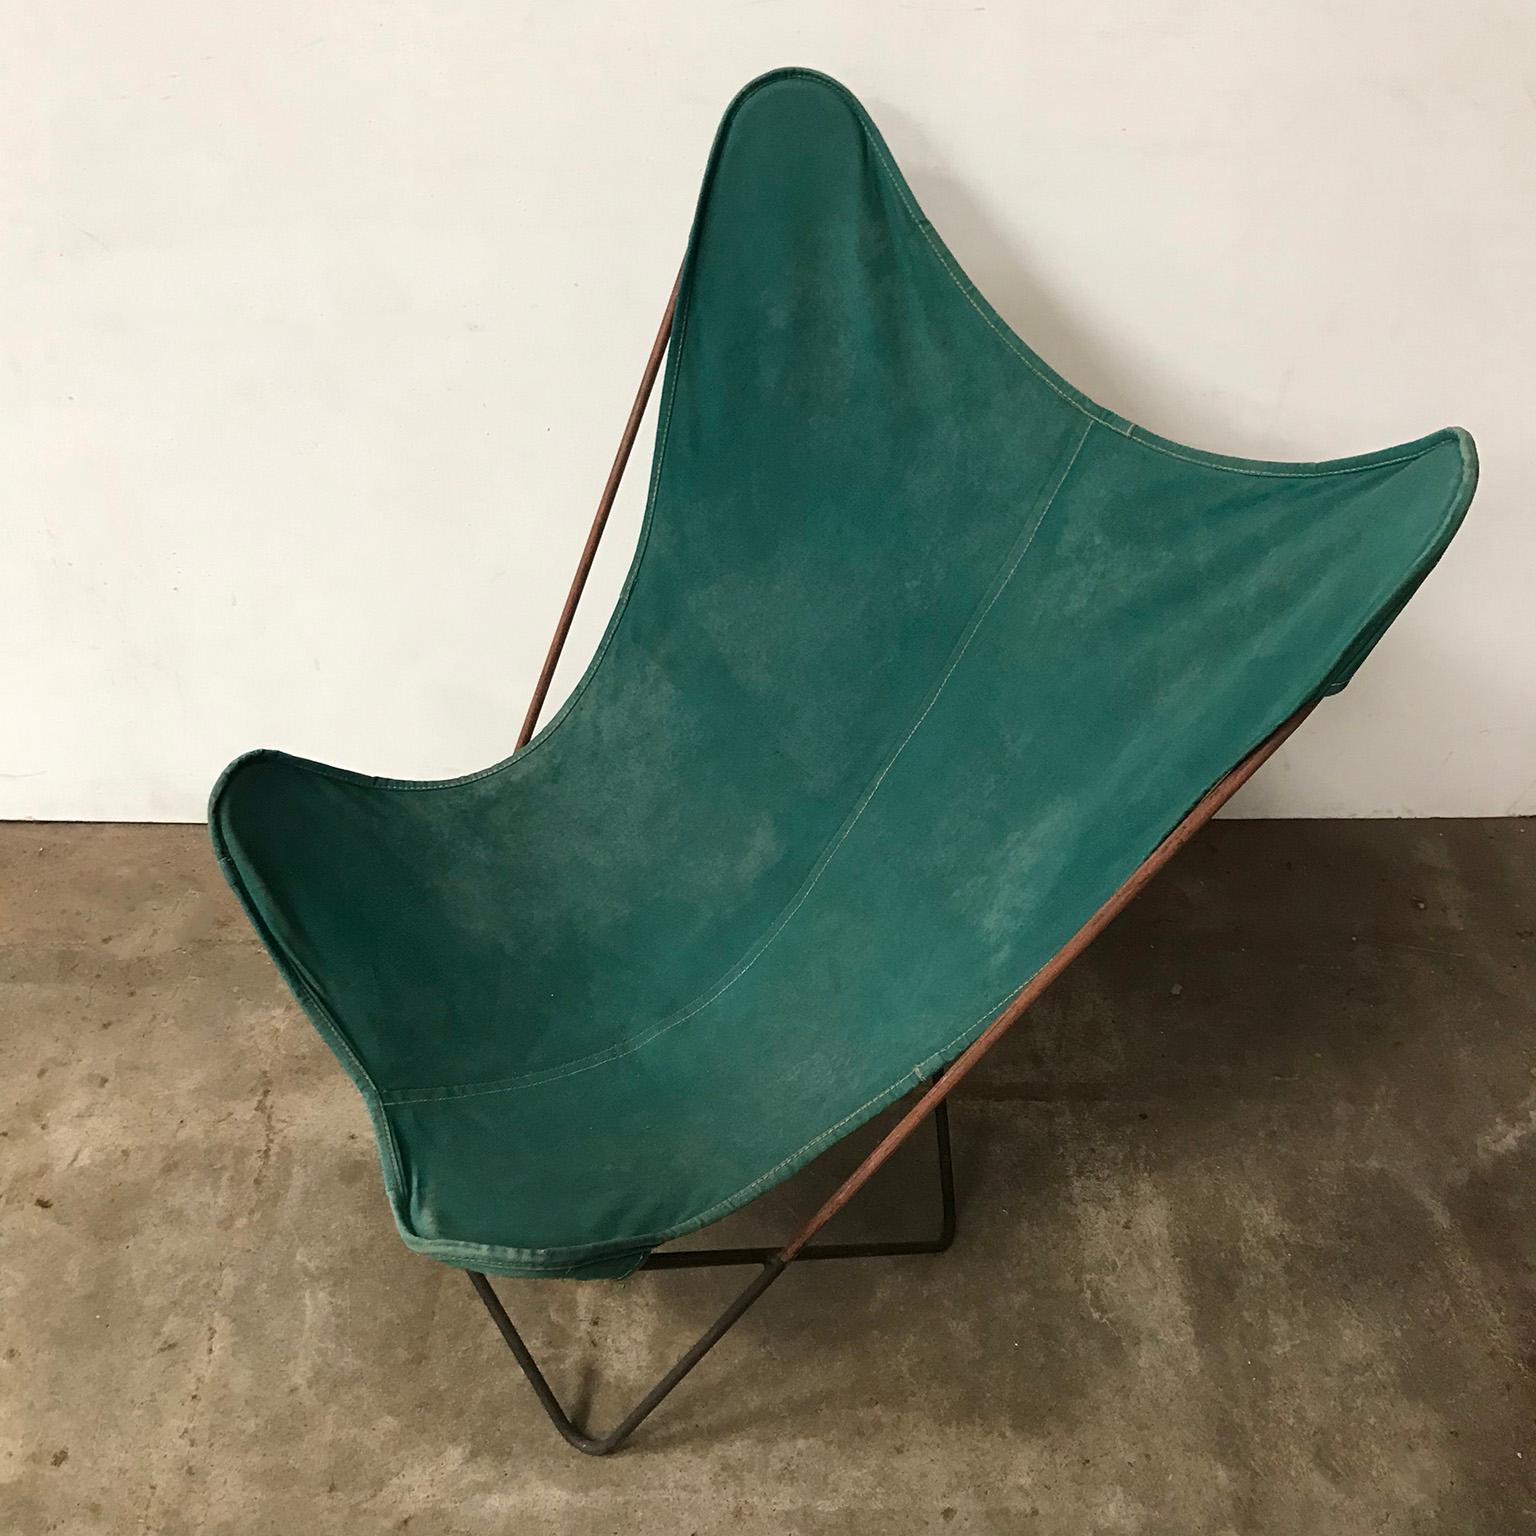 Mid-20th Century 1947, Hardoy, Ferrari, Green Cover with Grey Base Butterfly Chair